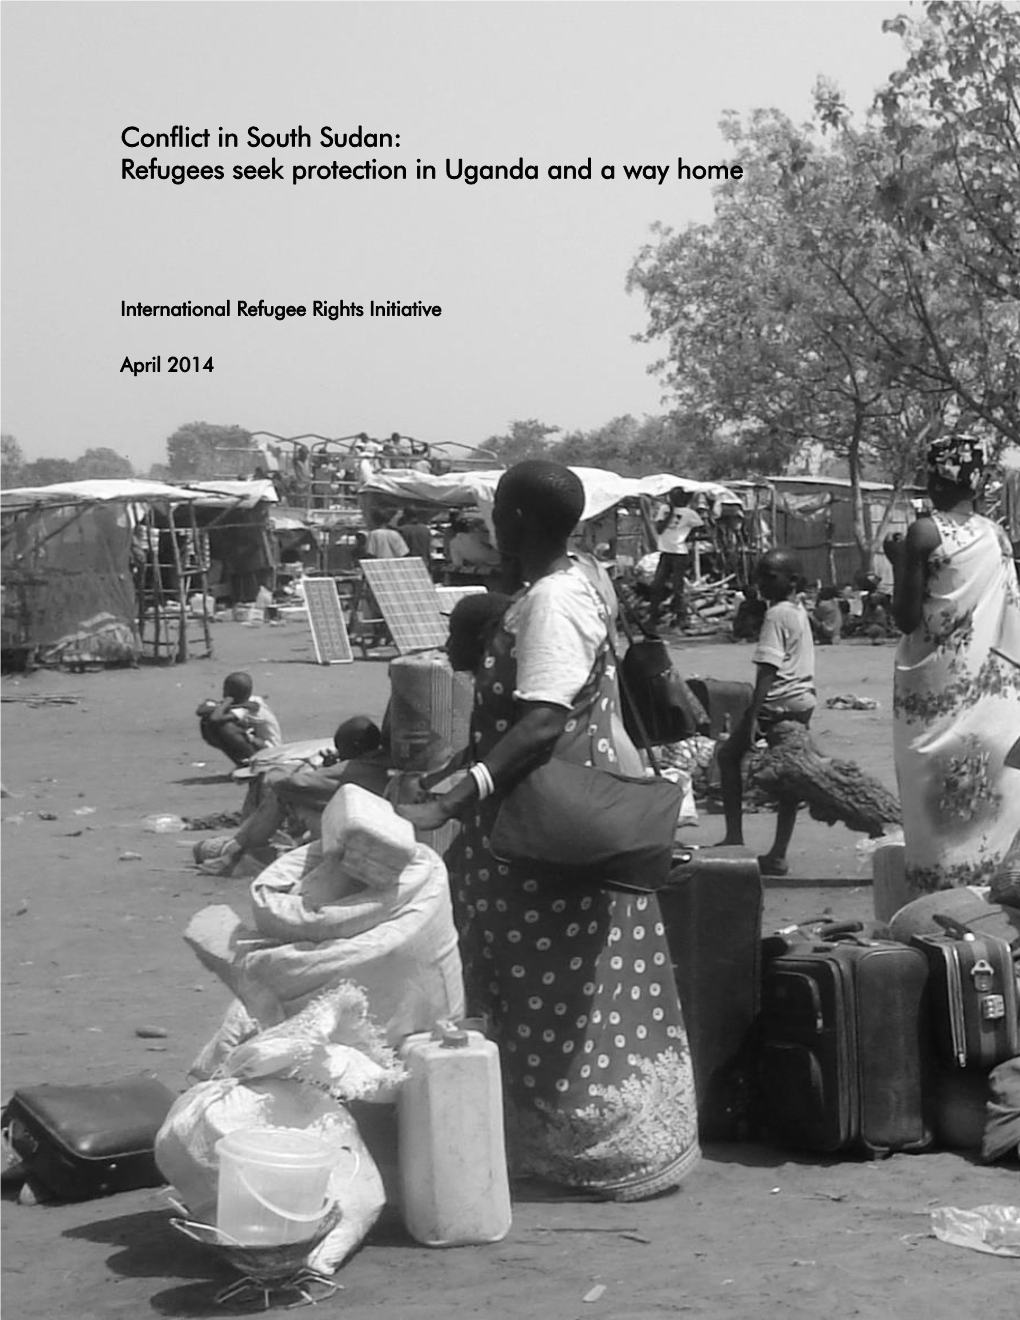 Conflict in South Sudan: Refugees Seek Protection in Uganda and a Way Home